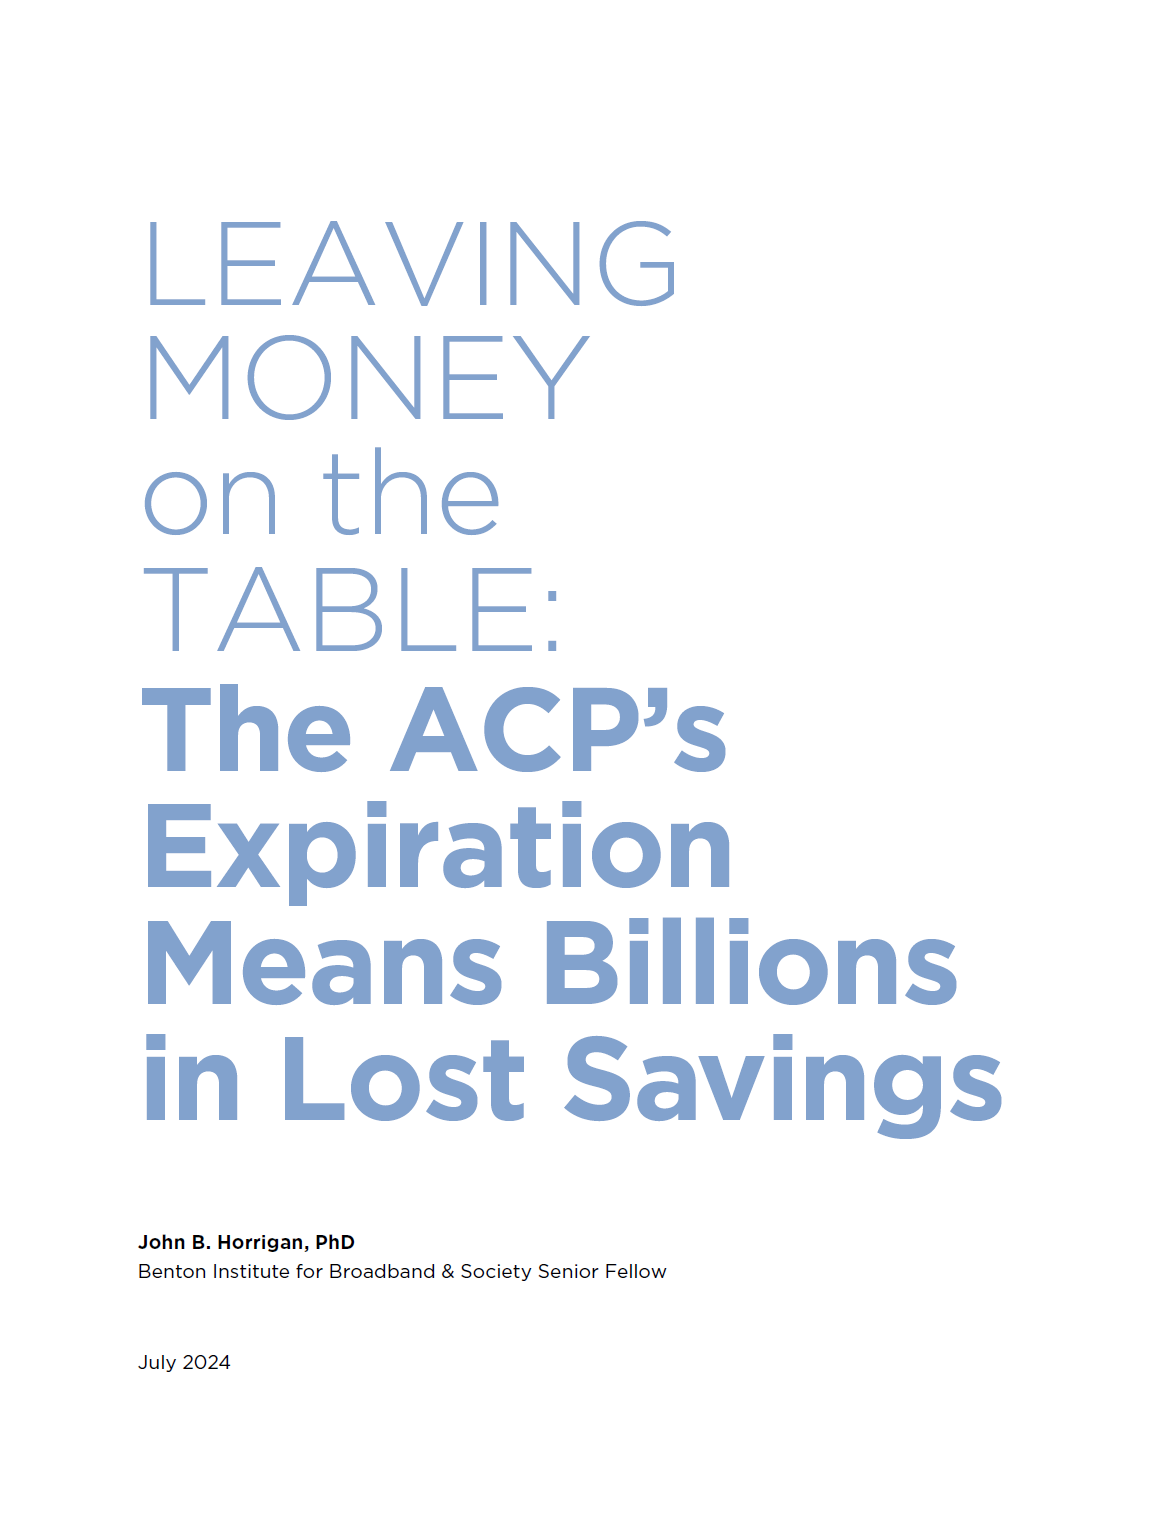 The ACP’s Expiration Means Billions in Lost Savings